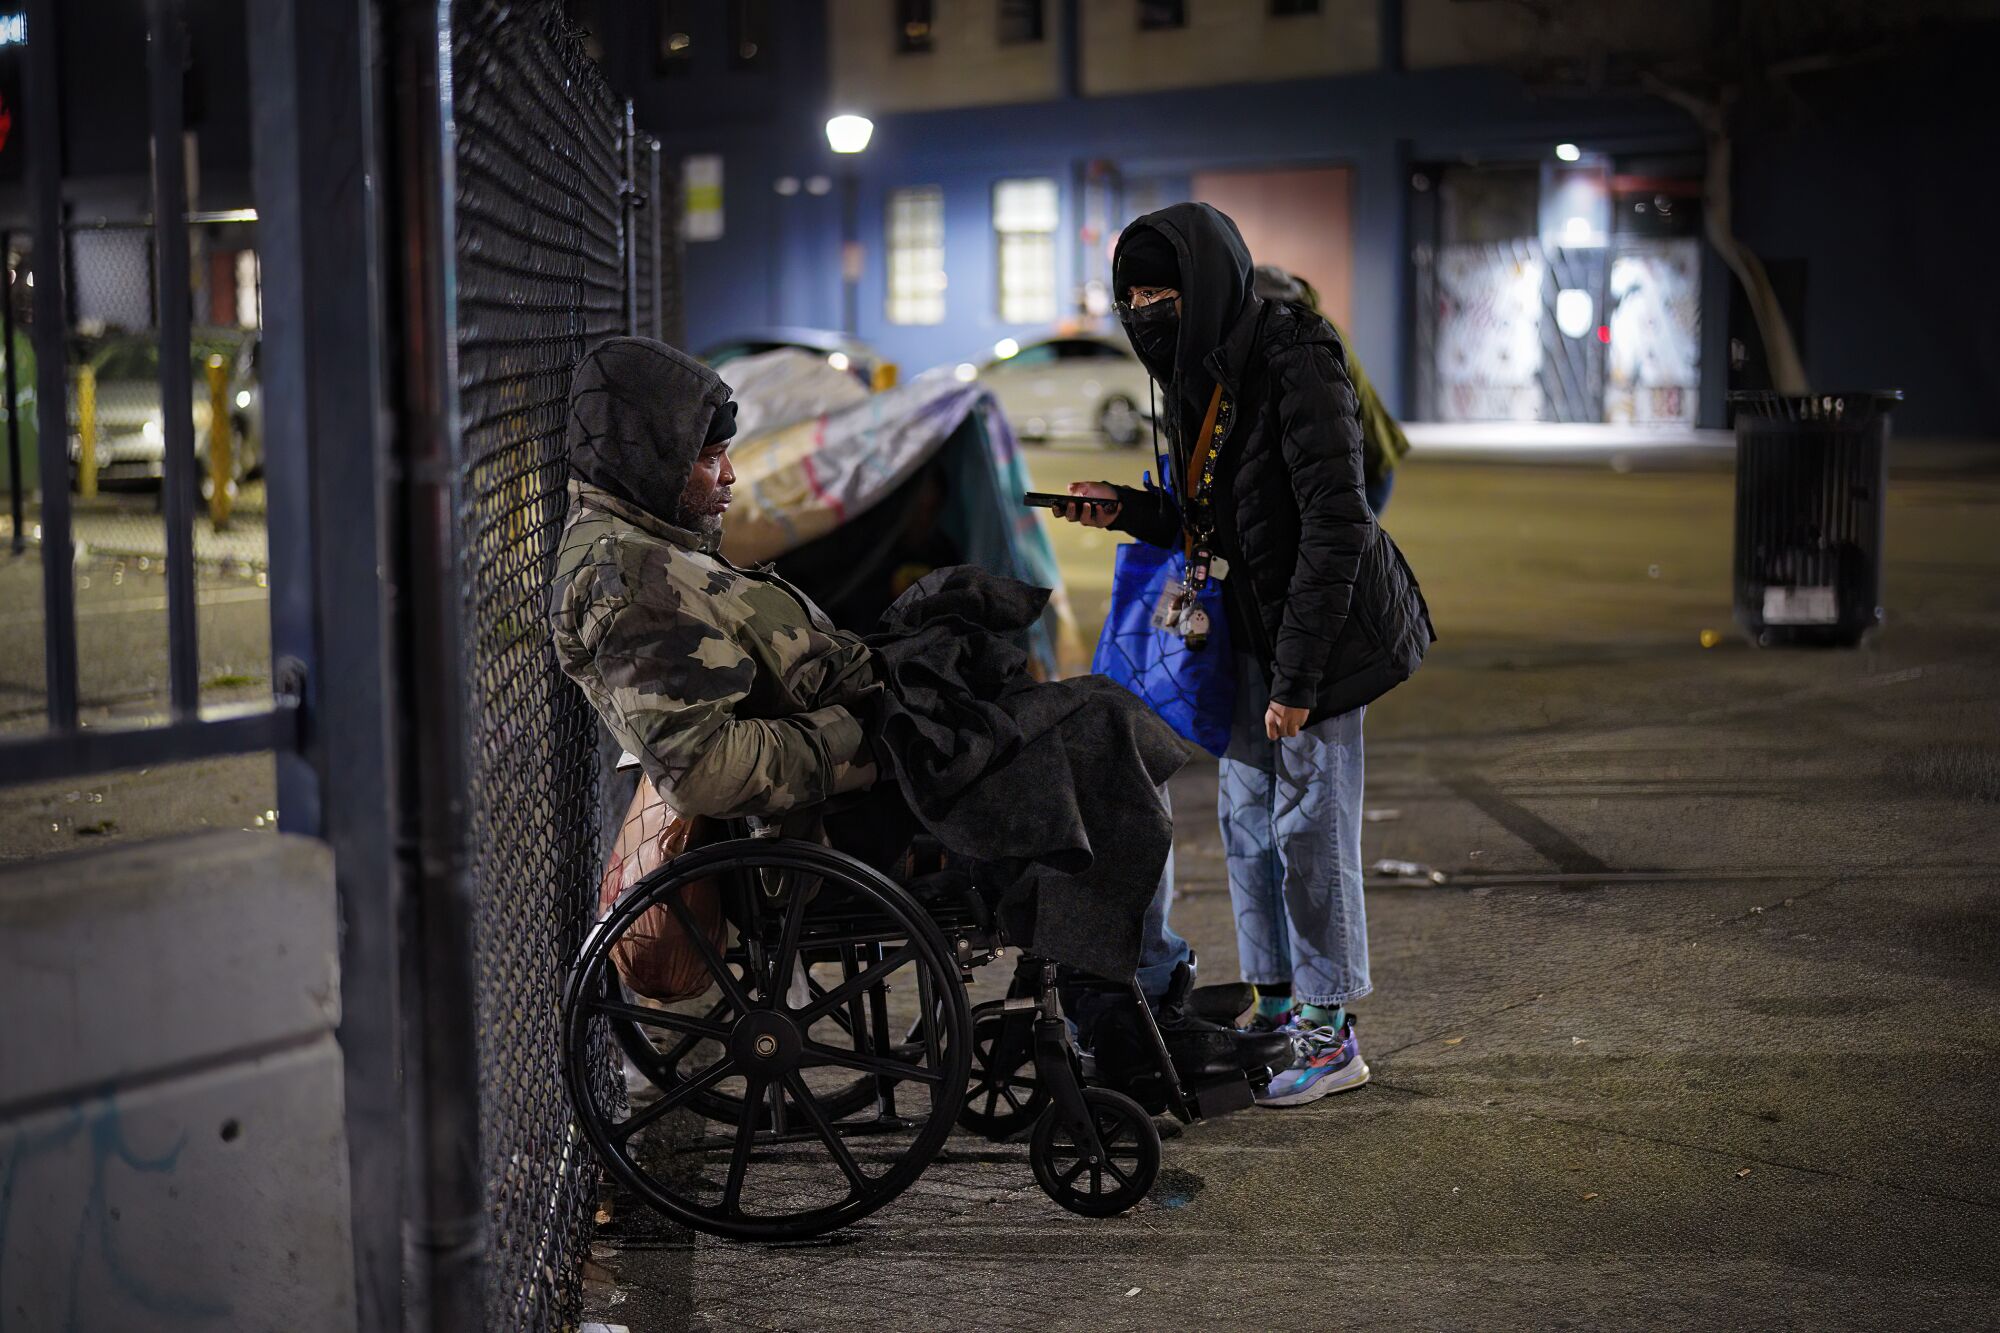 Volunteer Deborah Valera Rivera spoke with David Turner who has been living on the streets for the past month.